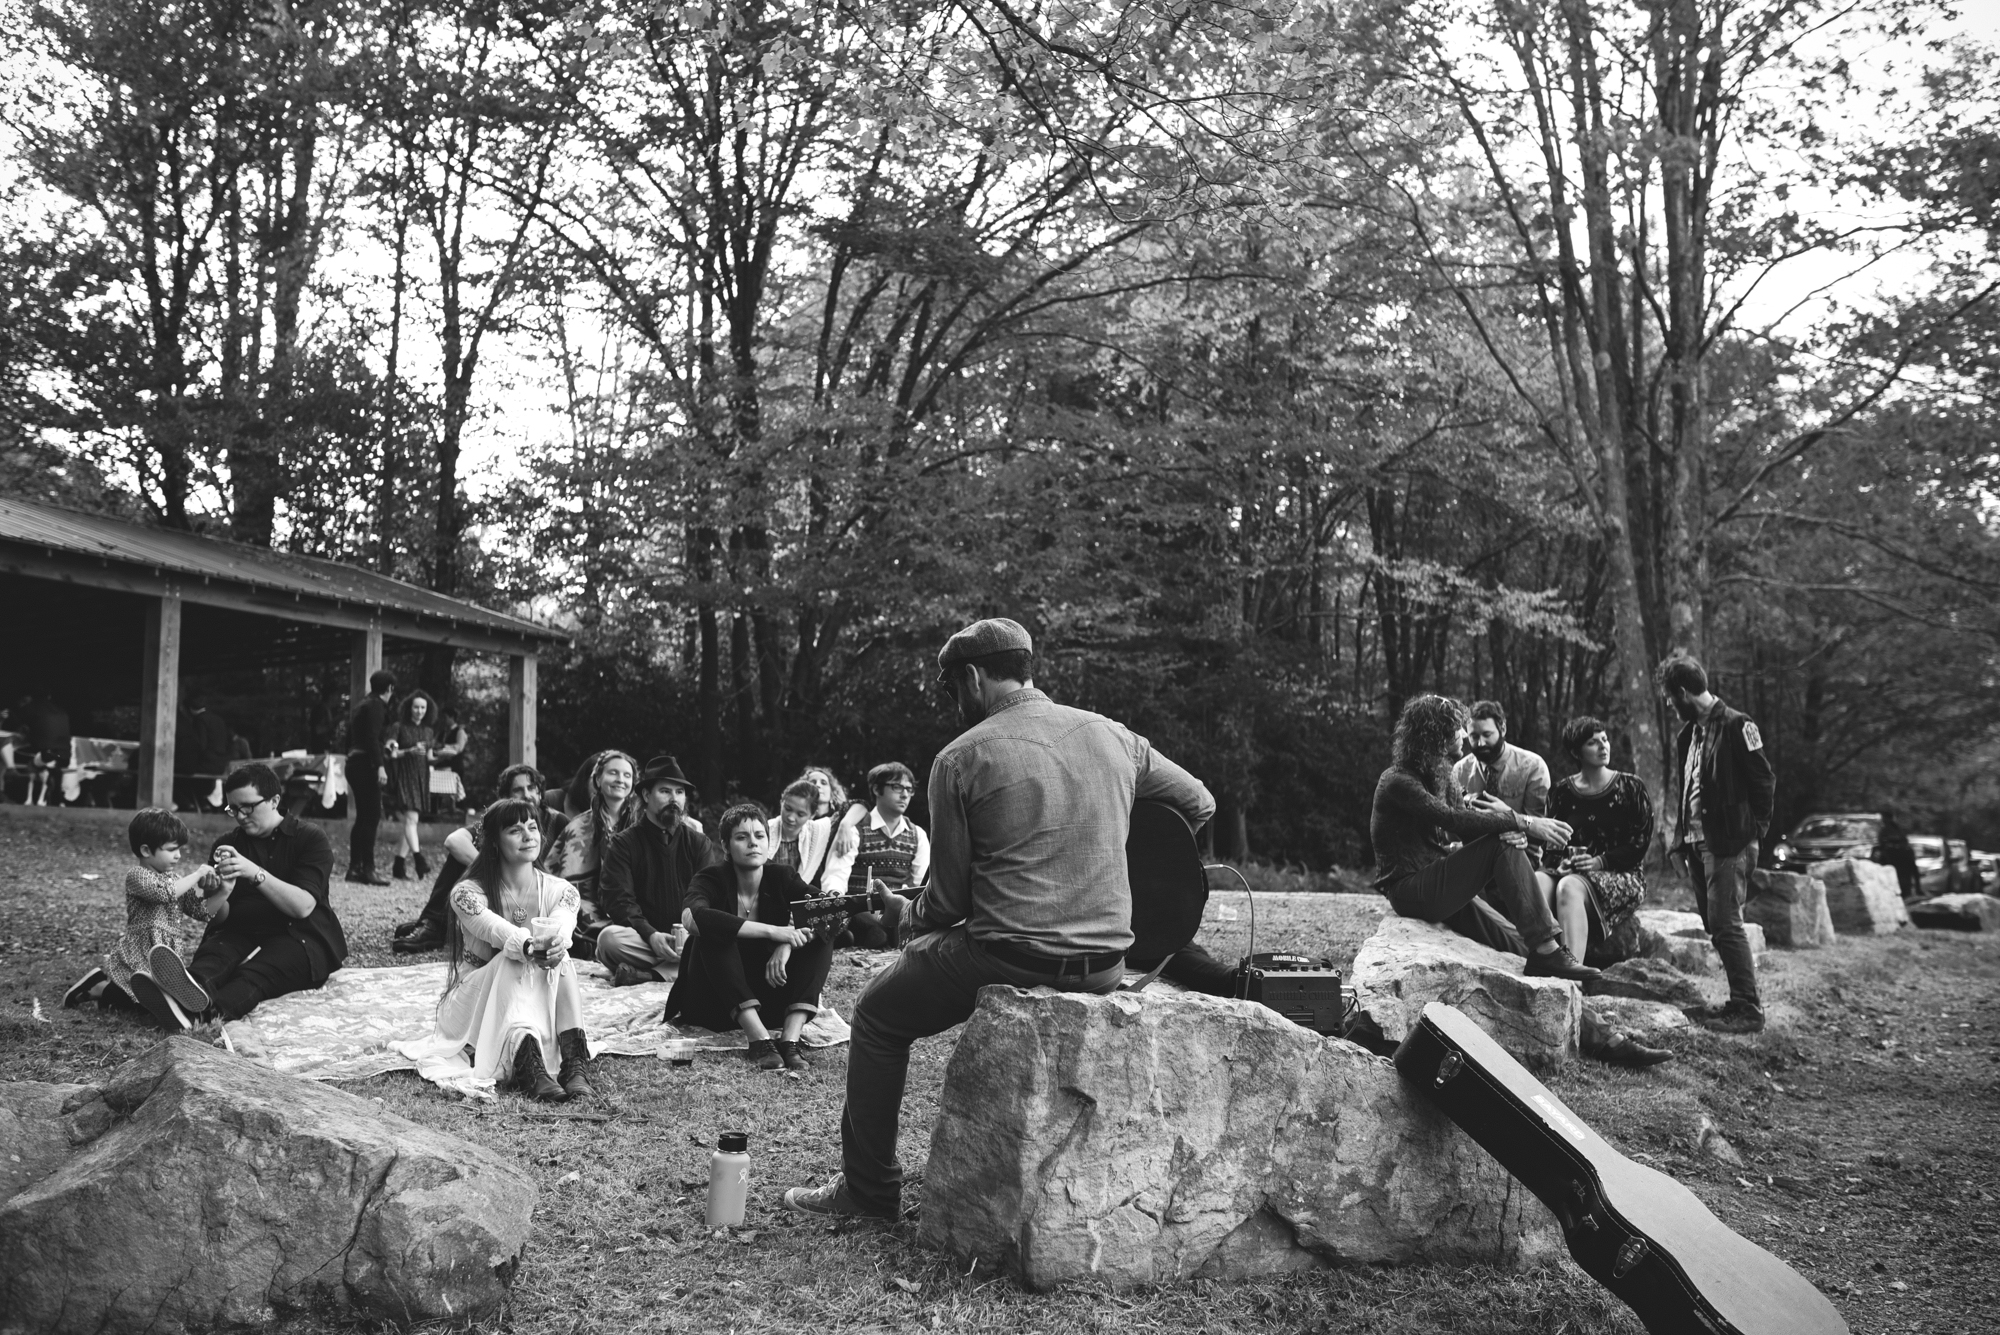  Mountain Wedding, Outdoors, Rustic, West Virginia, Maryland Wedding Photographer, DIY, Casual, friend playing guitar in front of guests, black and white photo 